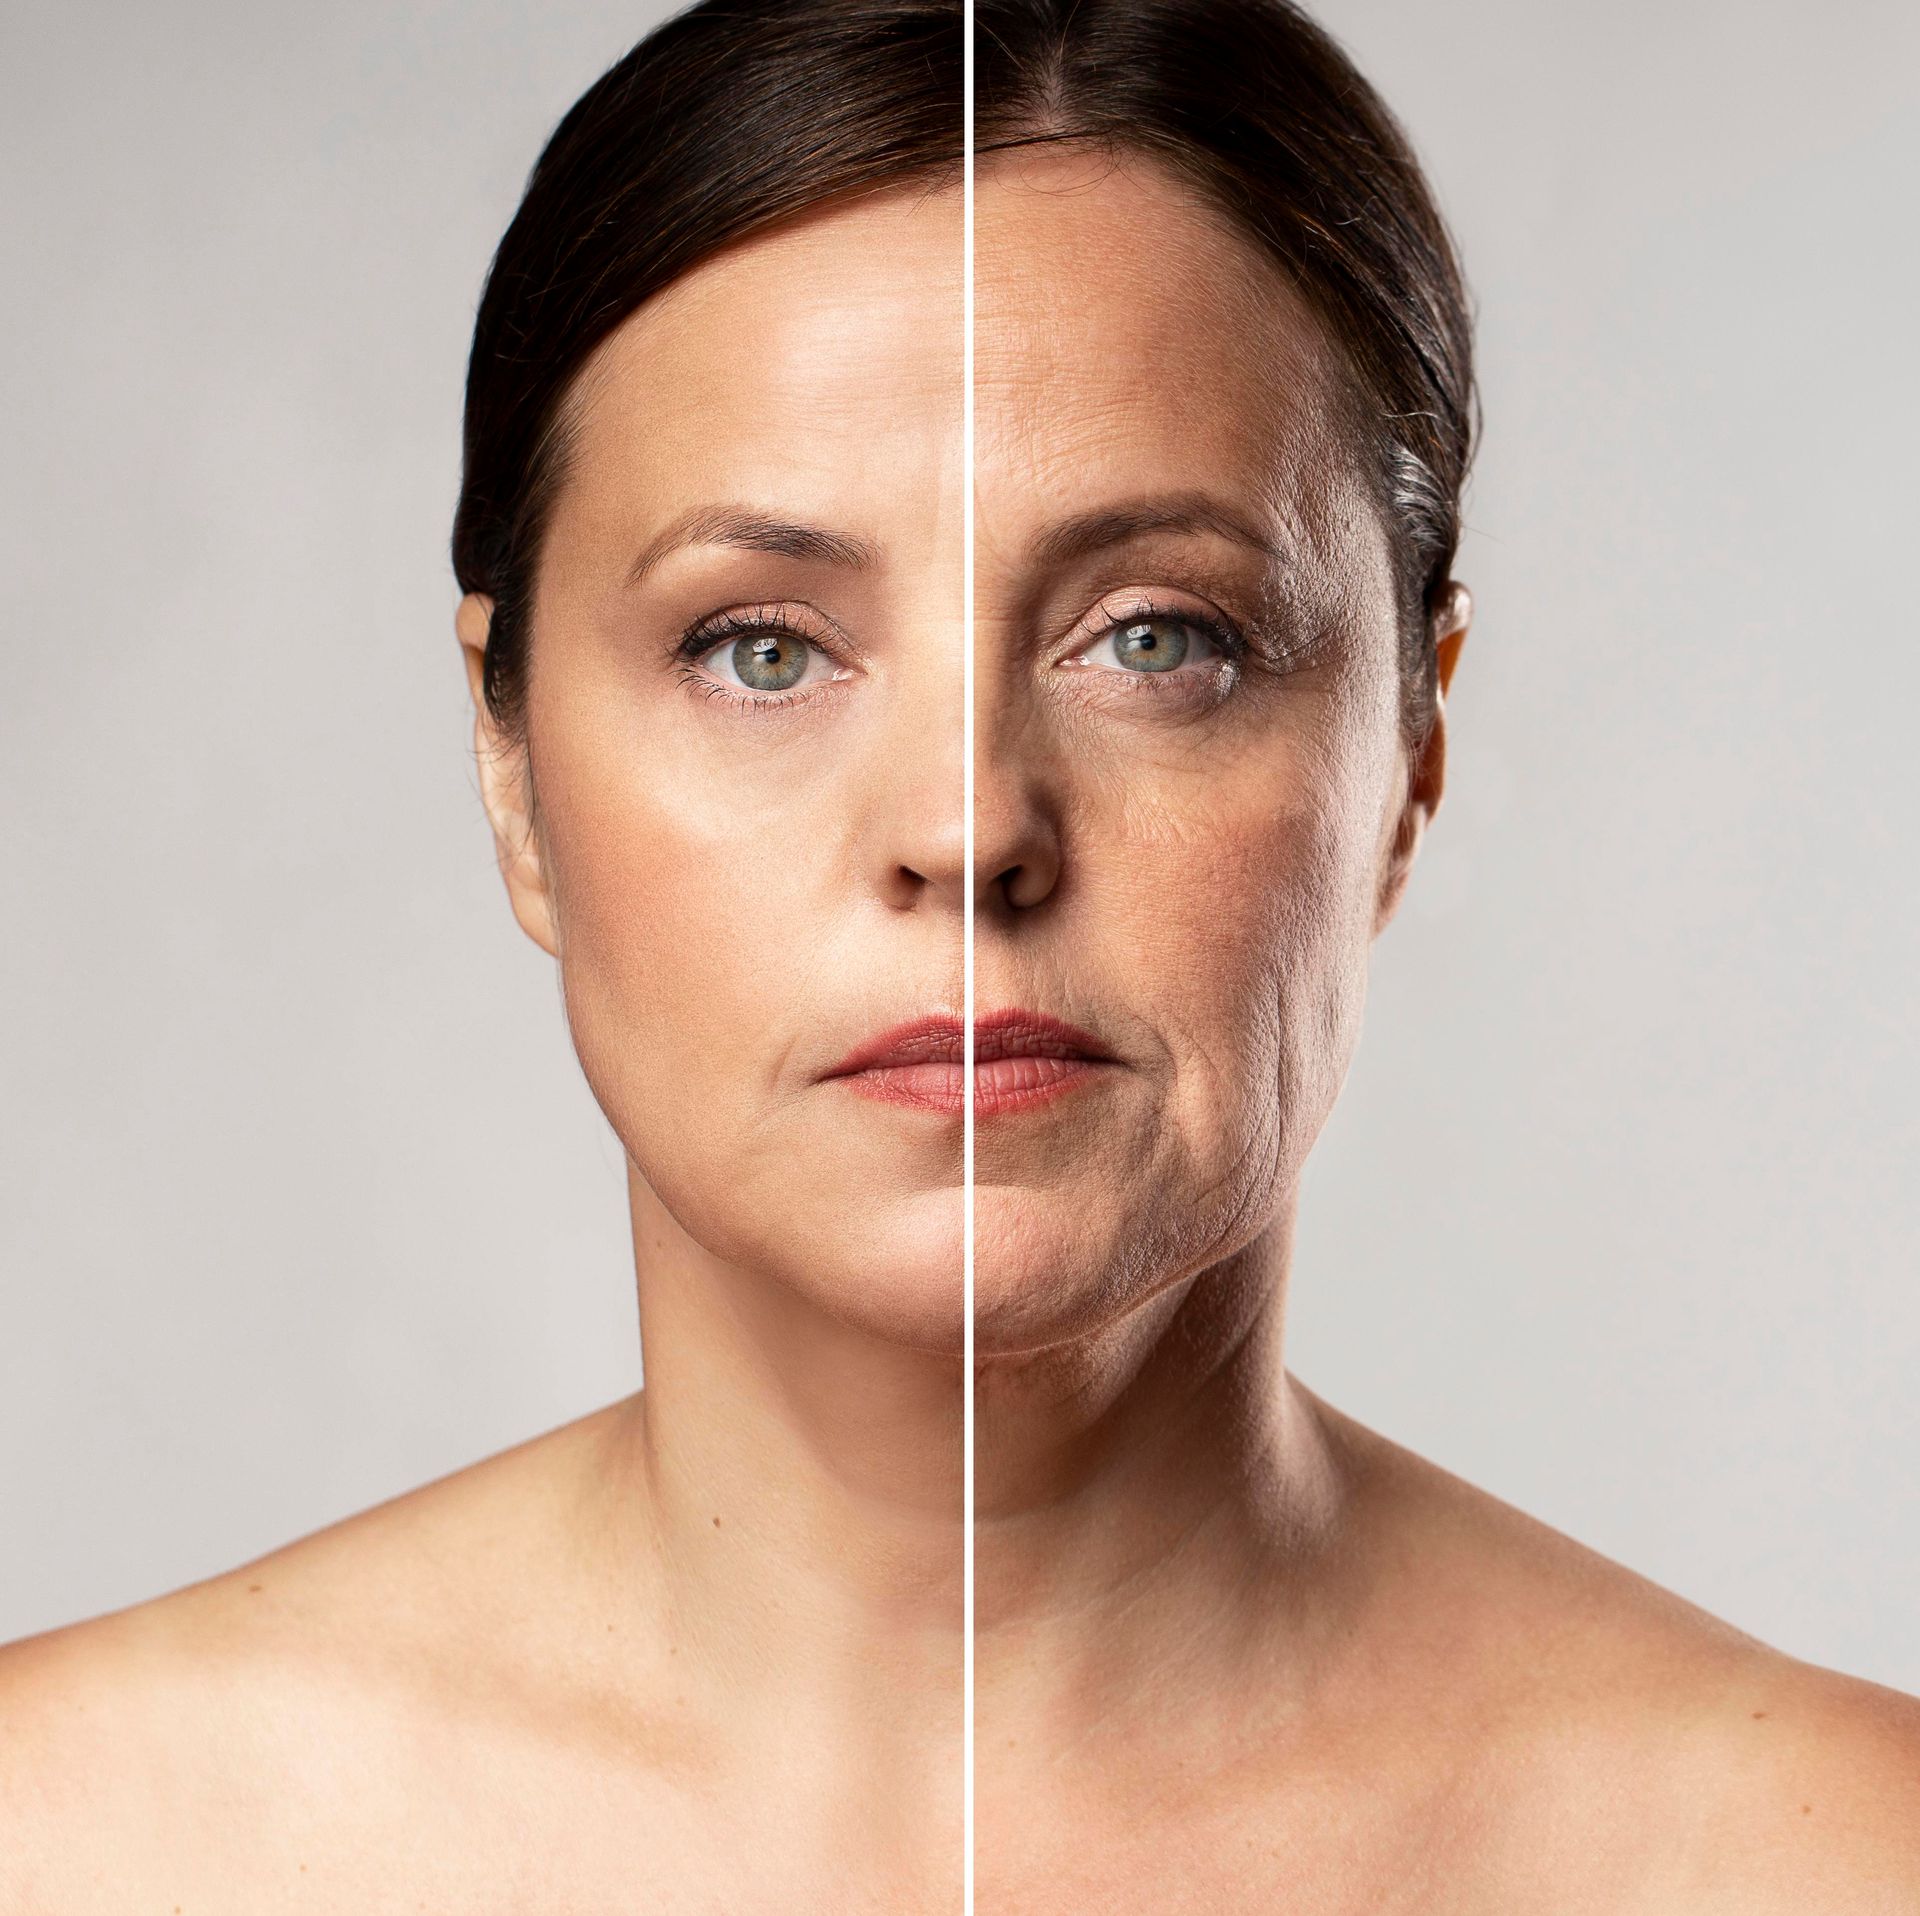 a before and after photo of a woman 's face .